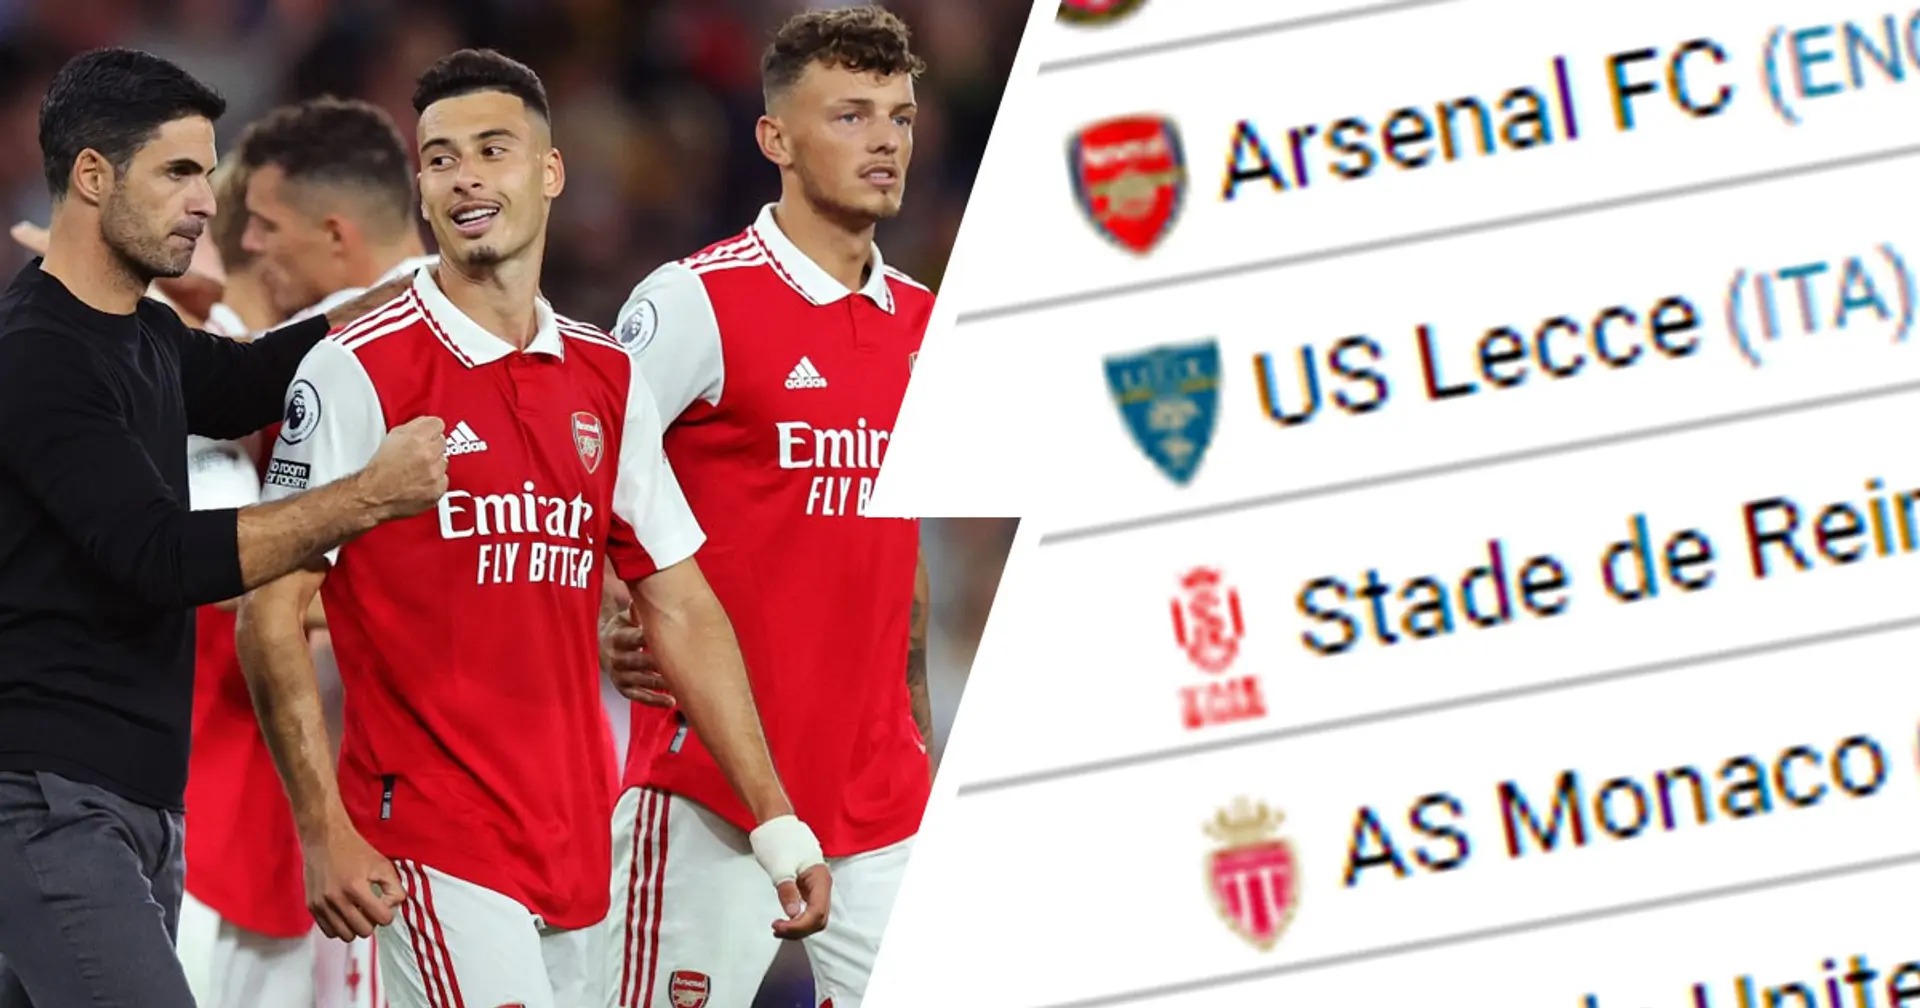 Arsenal named as fourth youngest team in Europe’s top leagues – only 2nd in Premier League